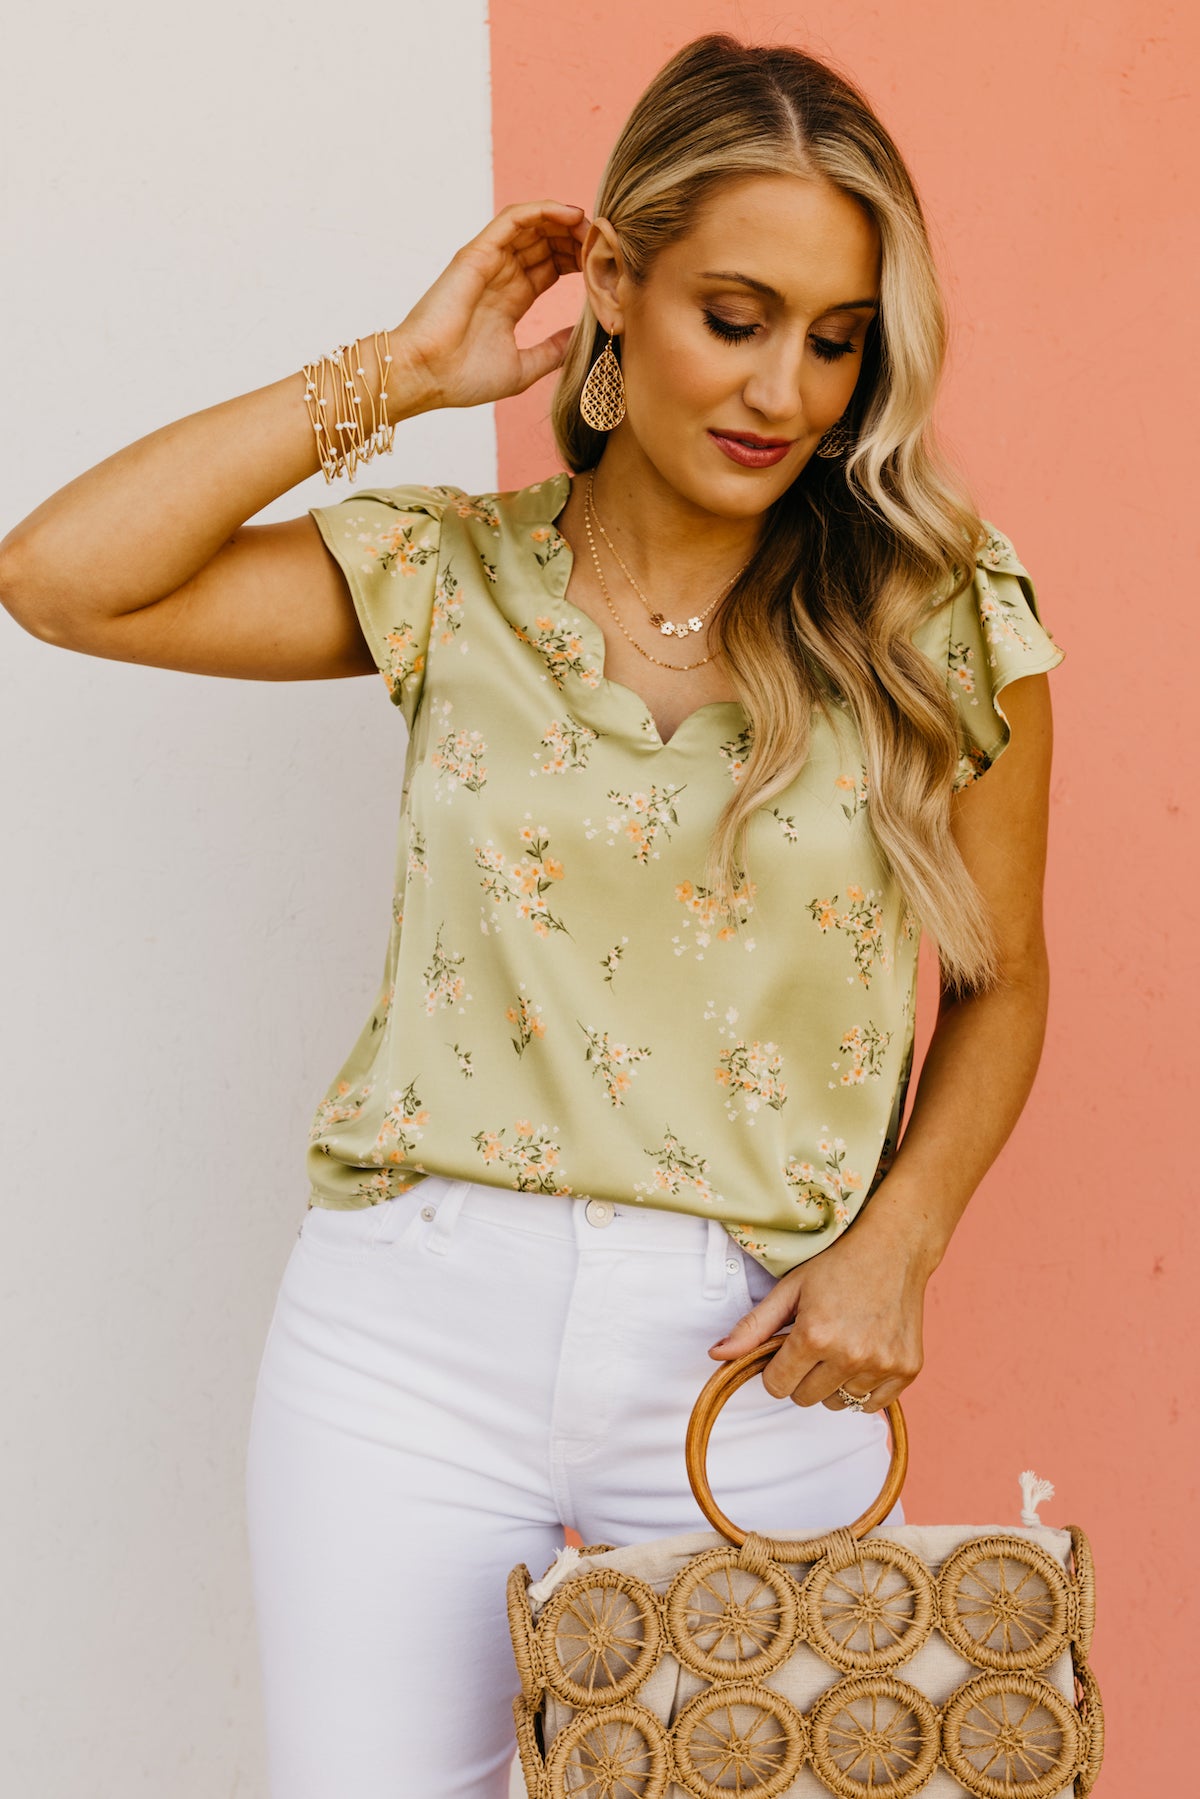 The Avian Floral Scallop Satin Top